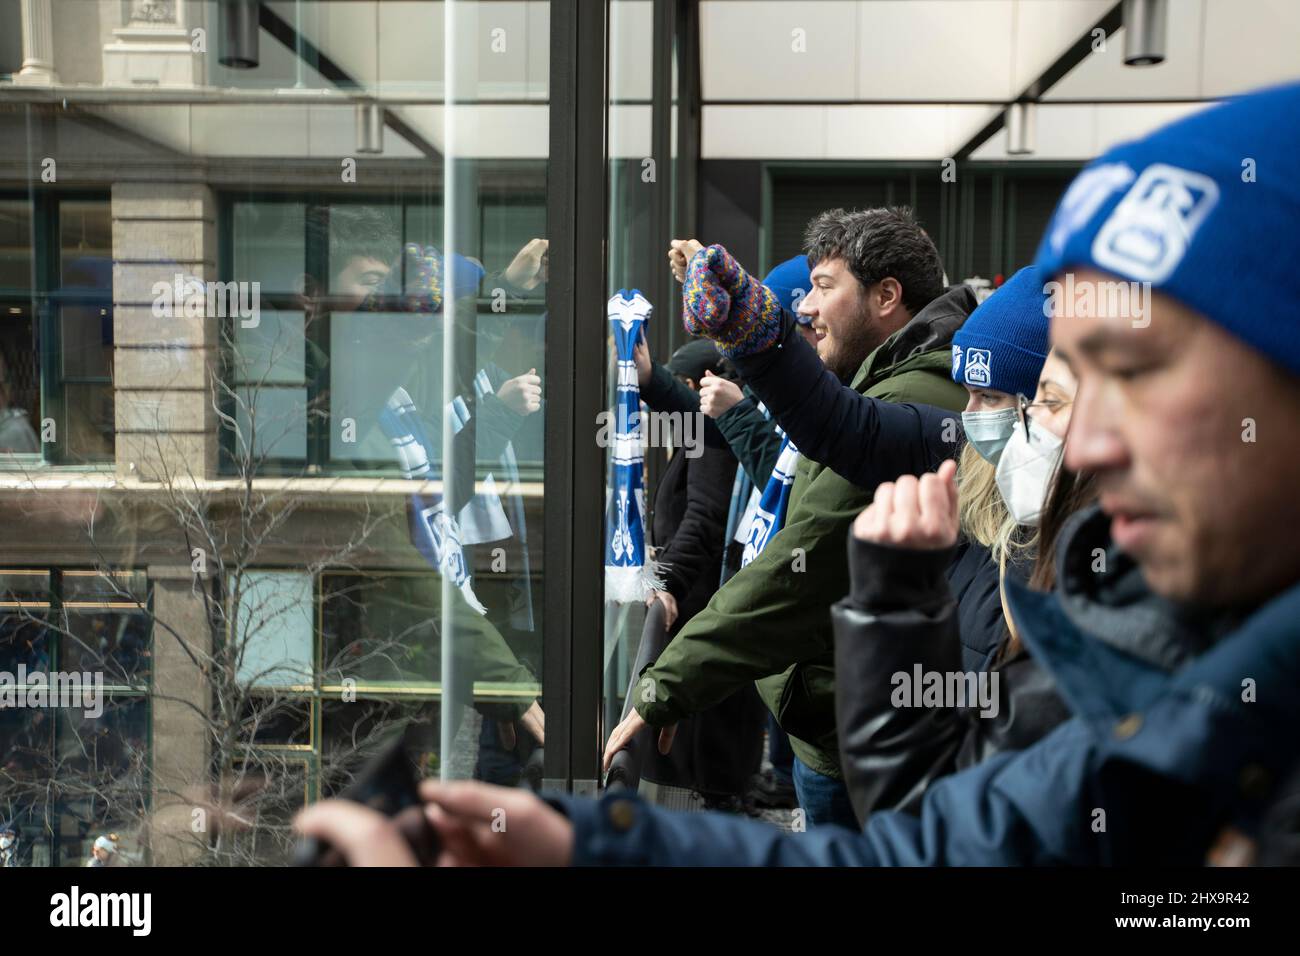 Minneapolis, Minnesota, USA. March 10, 2022, Protesters stand in the skyway of the IDS Center to cheer on the crowd of protesters below during a teachers union strike. Credit: Chris Juhn/Alamy Live News Stock Photo